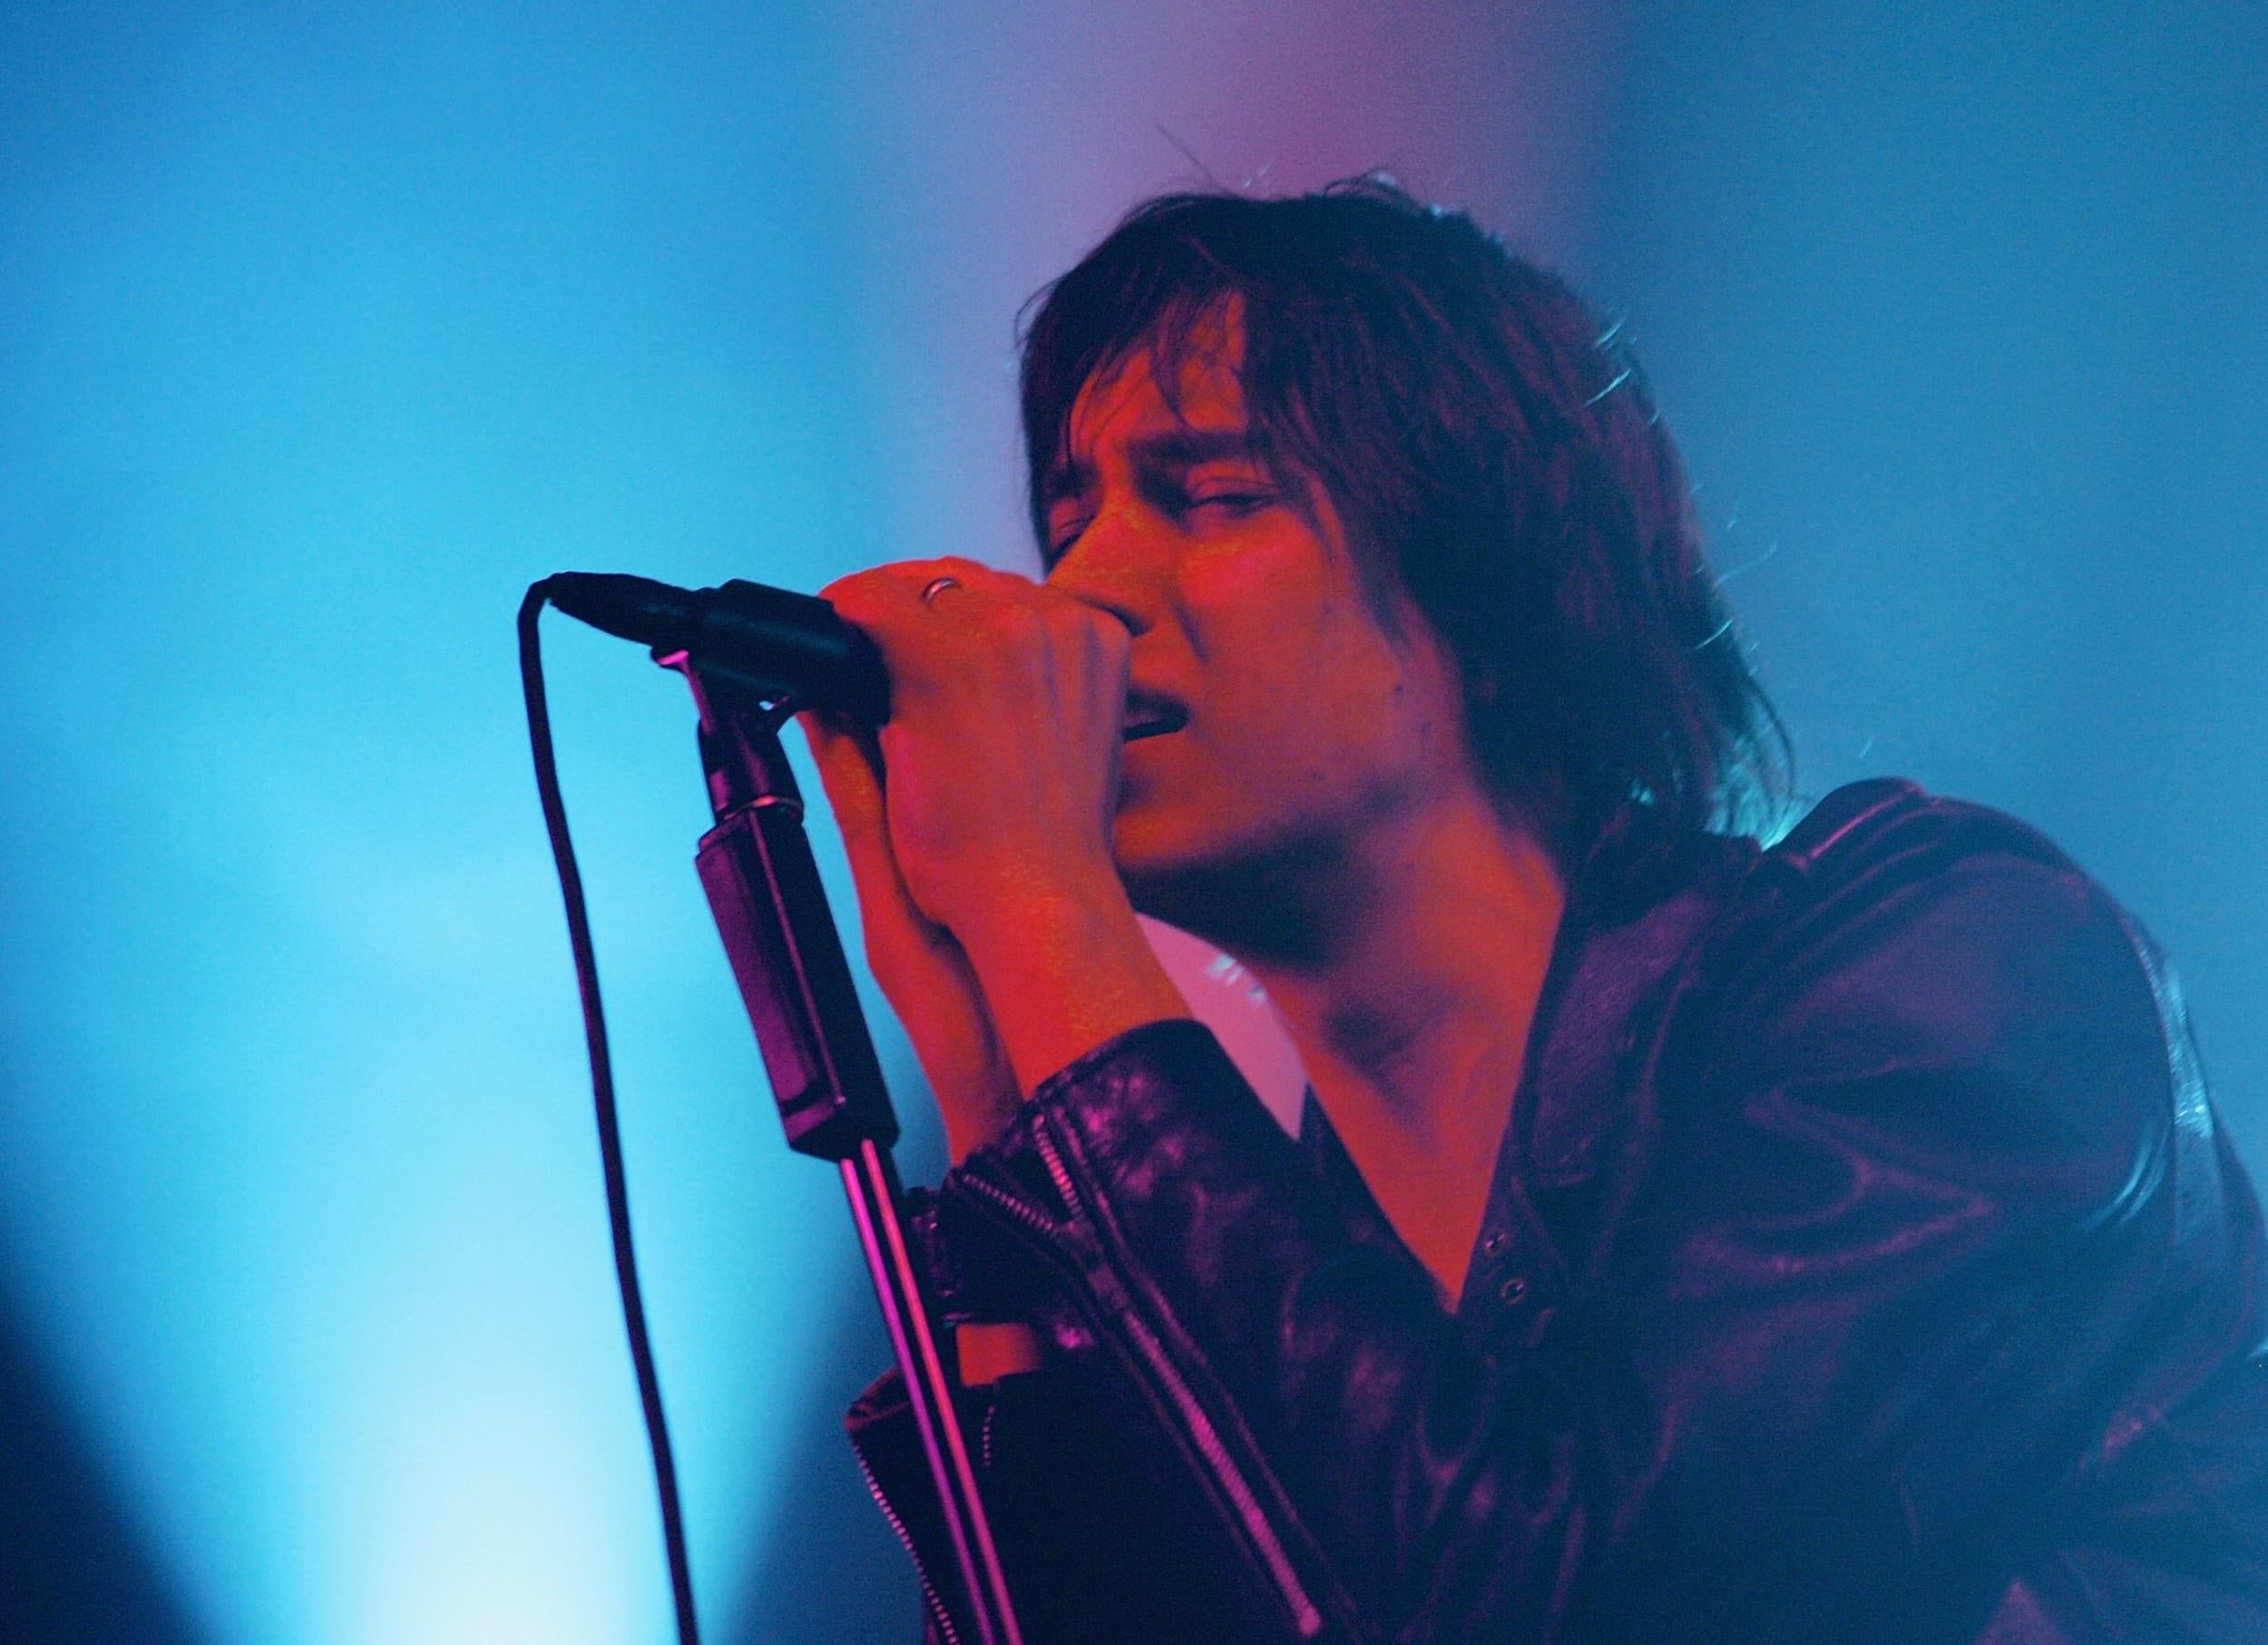 III. The cultural impact of The Strokes on the indie rock scene